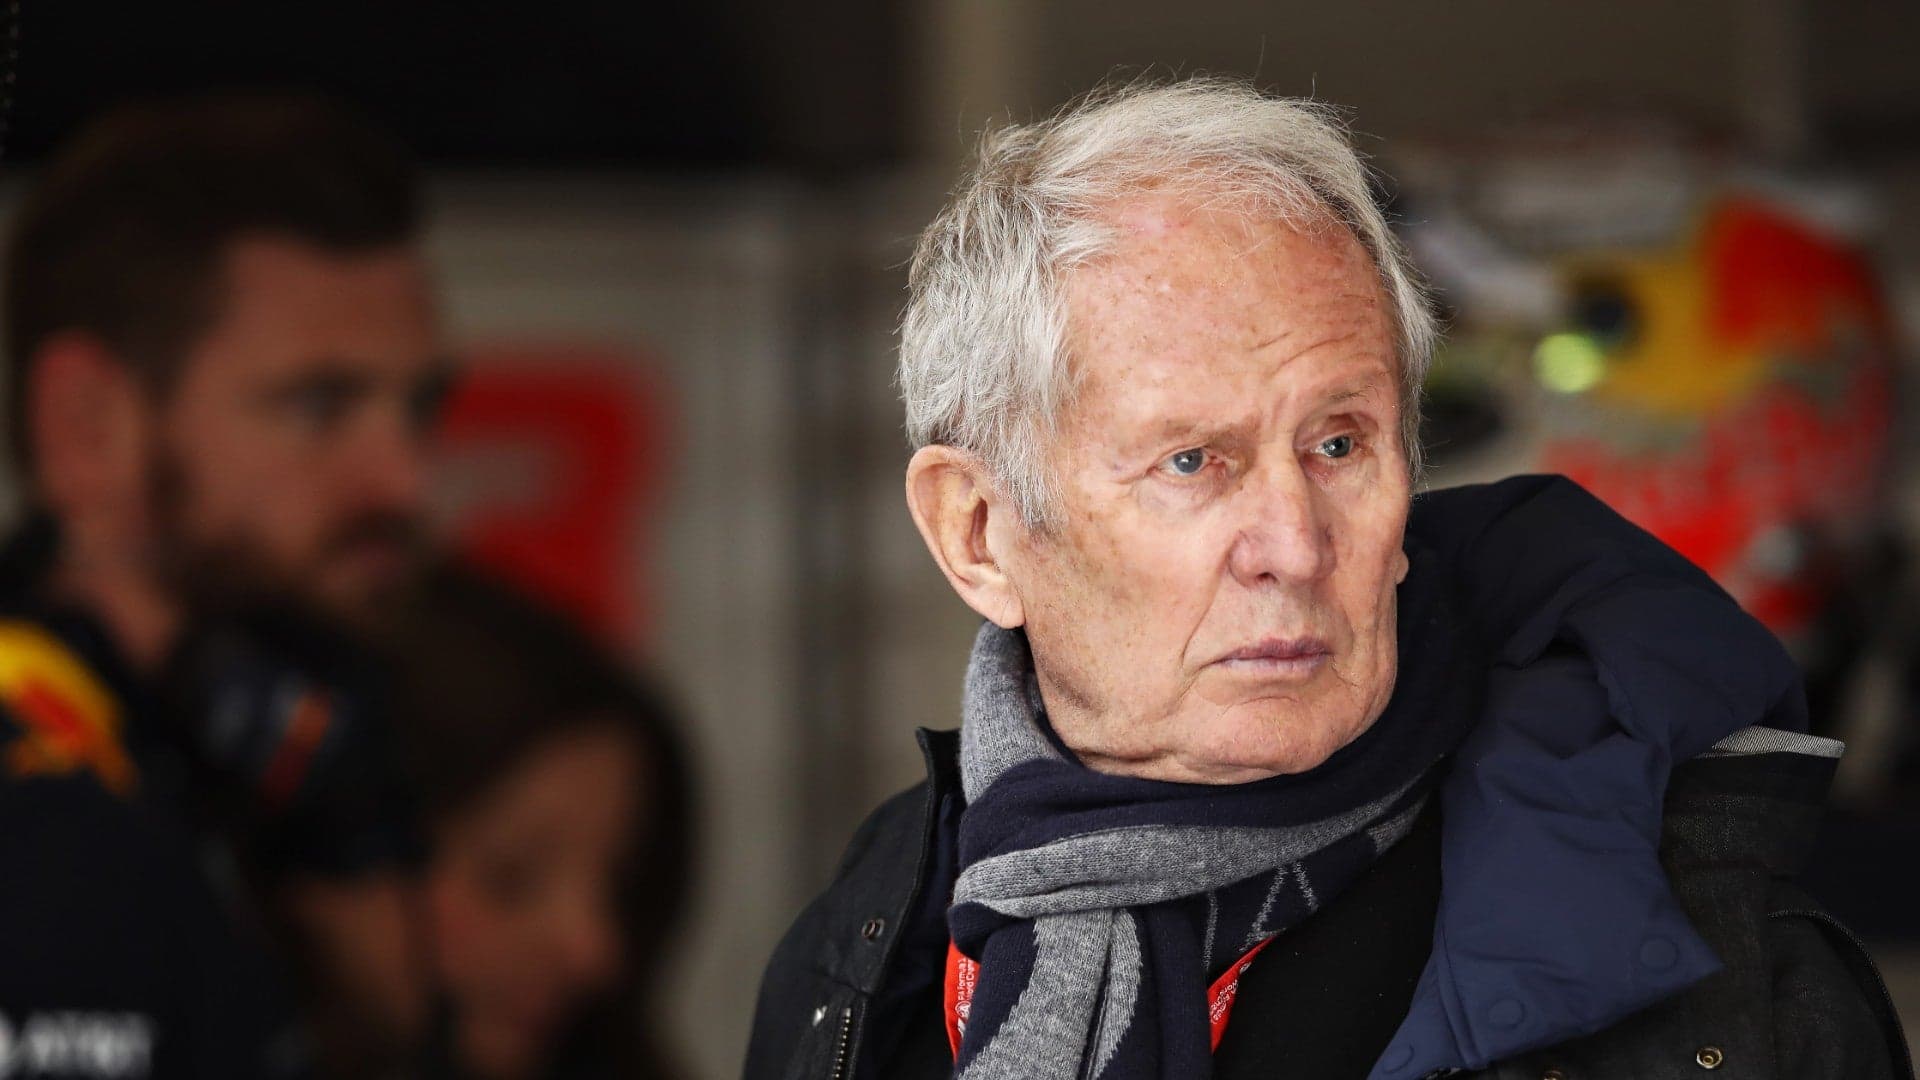 Red Bull Boss Helmut Marko Wanted ‘Corona Camp’ So F1 Drivers Would Catch the Virus